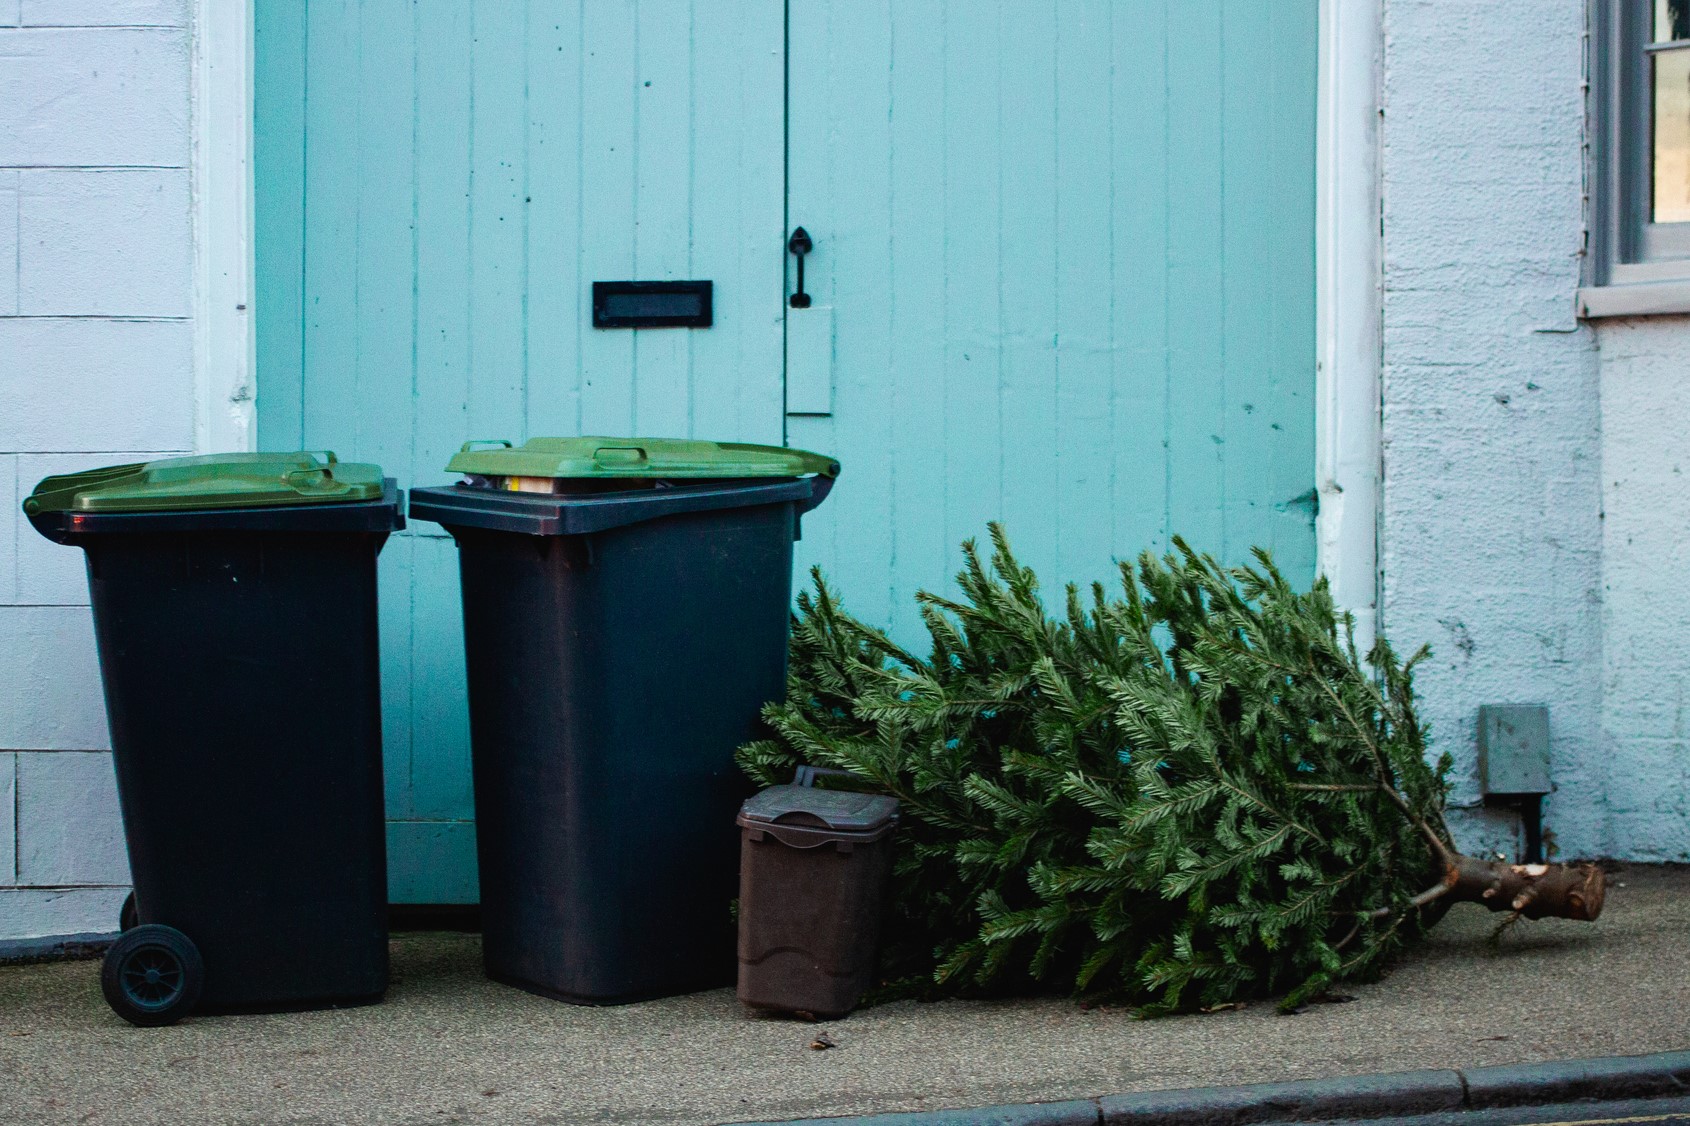 Article image for Trees for goats: A novel way to dispose of your unwanted Christmas tree